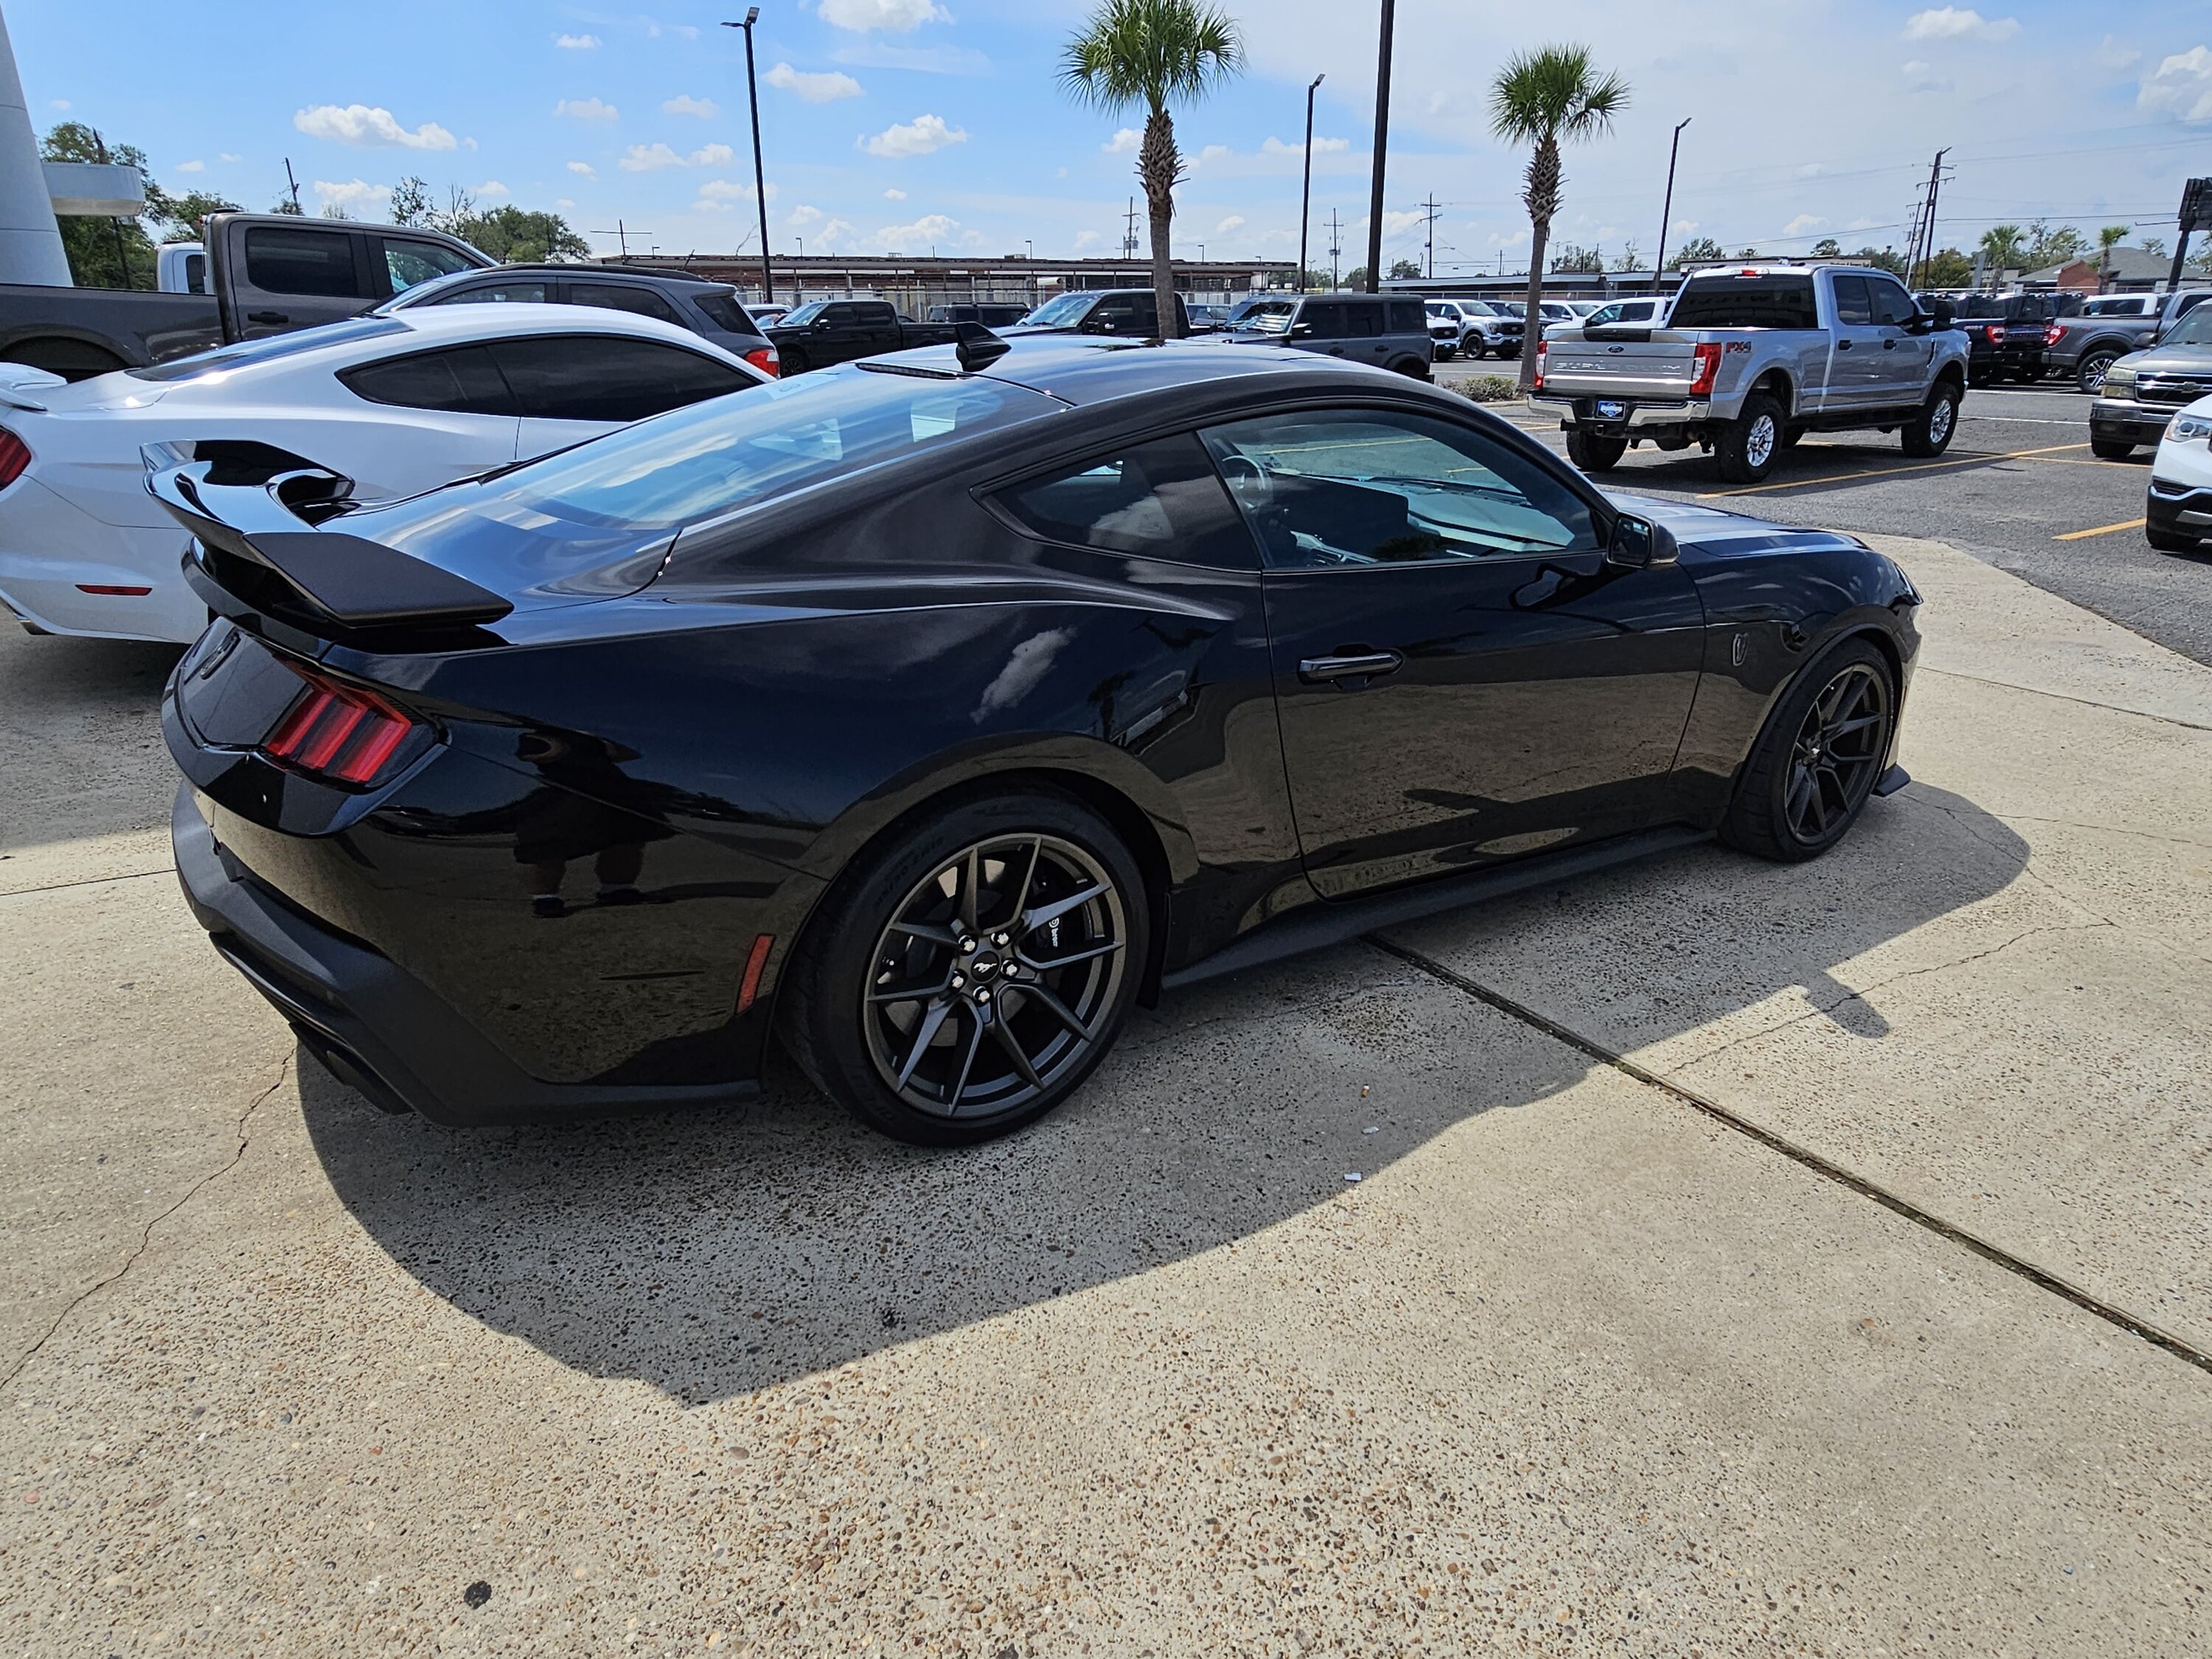 S650 Mustang Who has received their Dark Horse with Handling Package? 20230916_122456